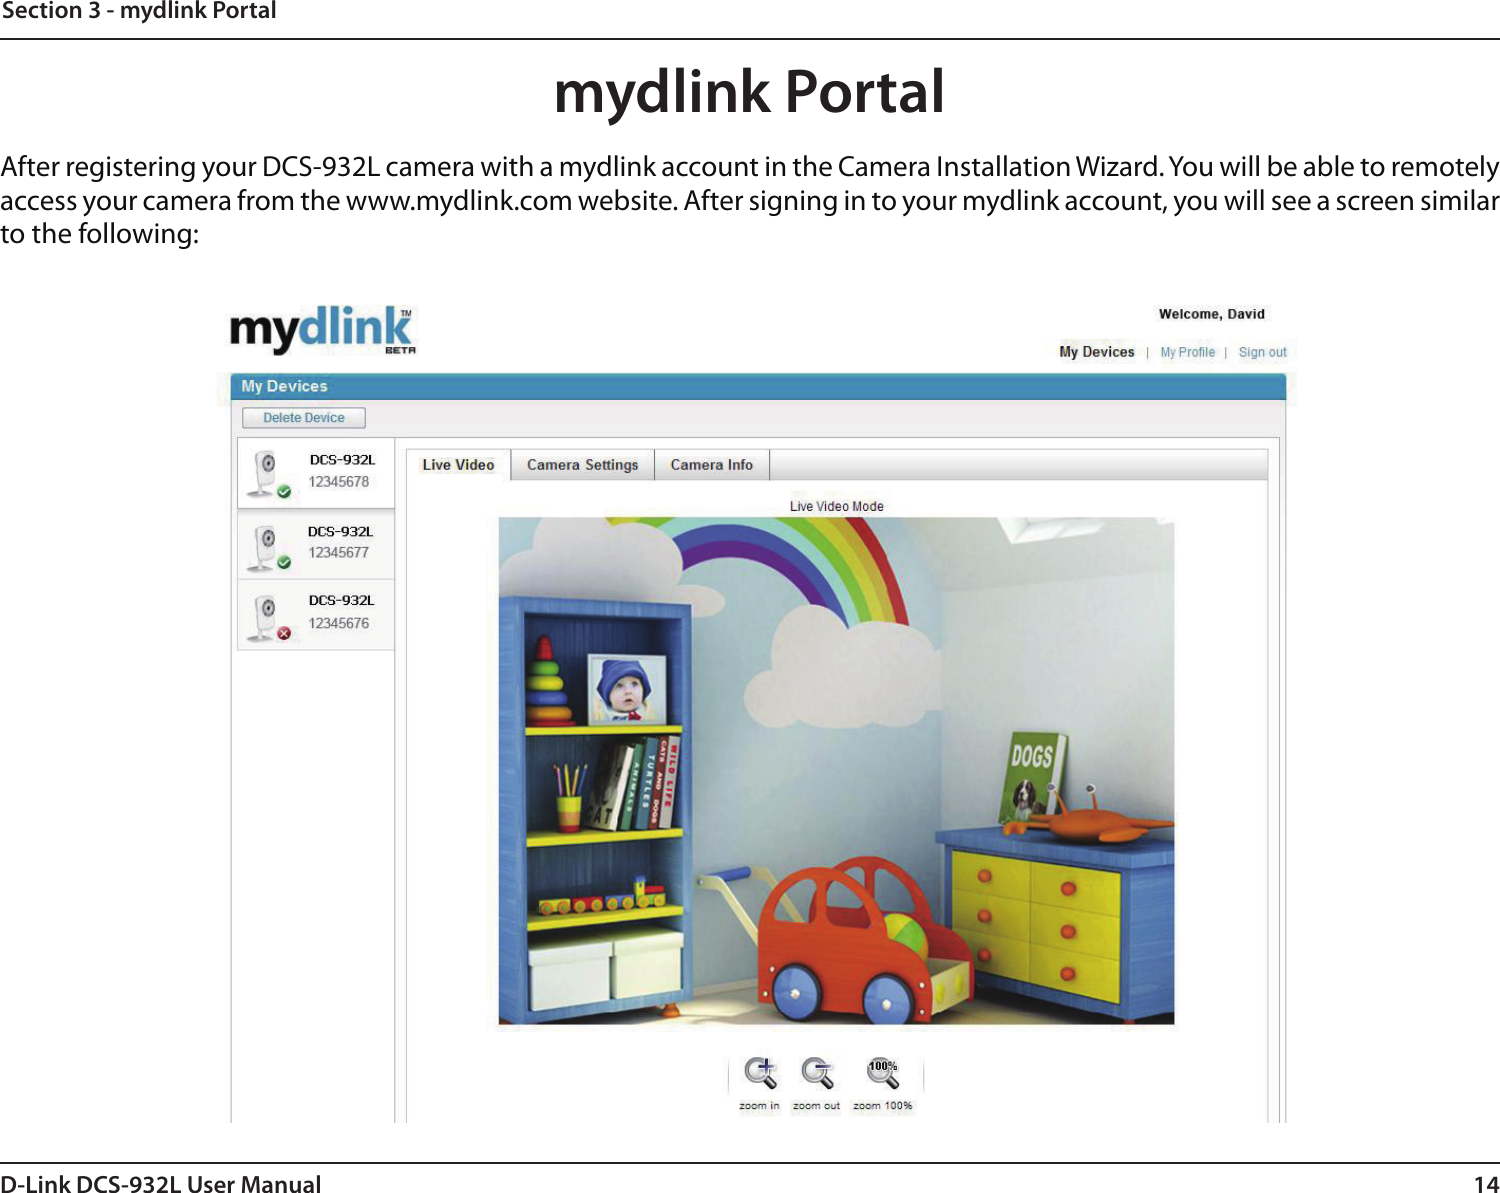 14D-Link DCS-932L User ManualSection 3 - mydlink Portalmydlink PortalAfter registering your DCS-932L camera with a mydlink account in the Camera Installation Wizard. You will be able to remotely access your camera from the www.mydlink.com website. After signing in to your mydlink account, you will see a screen similar to the following: